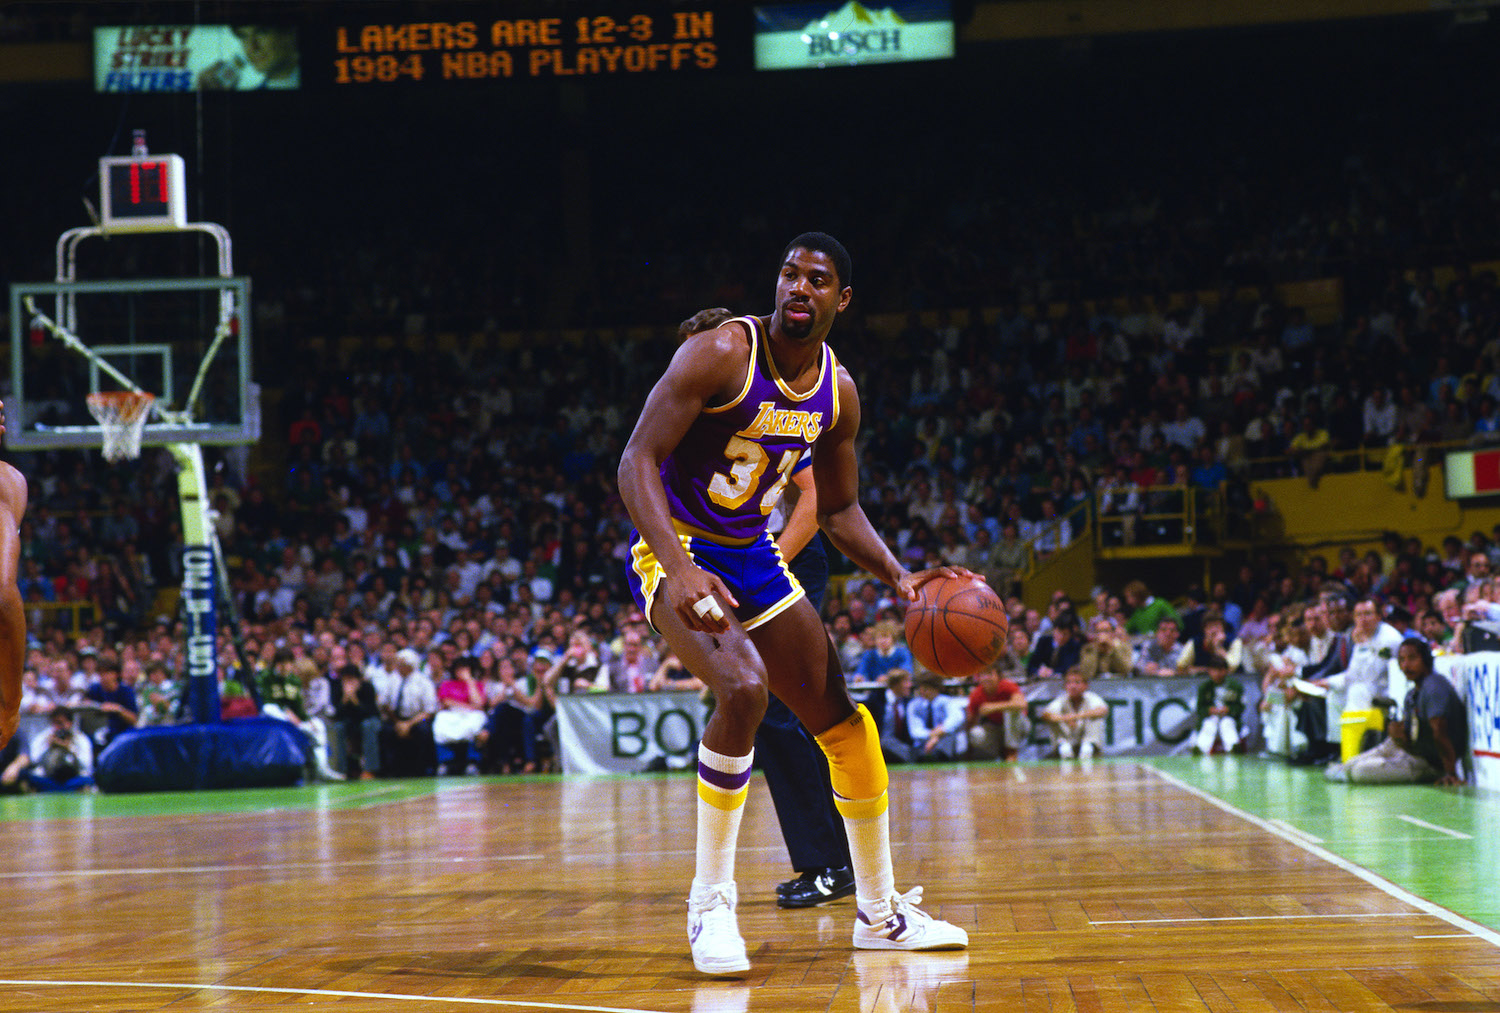 Lakers guard Magic Johnson dribbles the ball up the court during the 1984 NBA Finals.